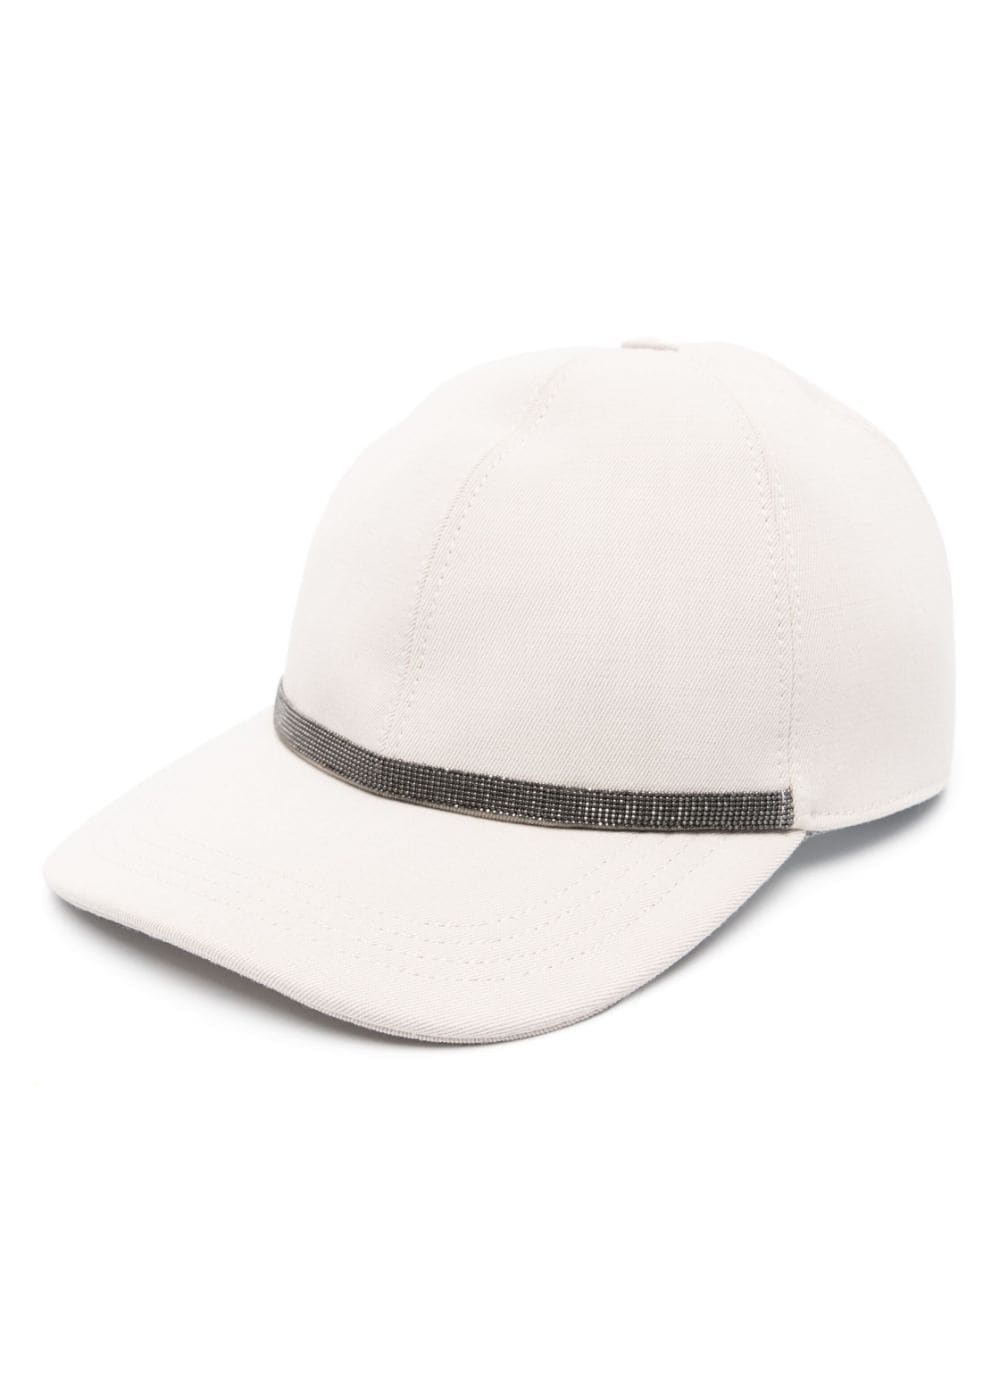 BRUNELLO CUCINELLI Light Beige Monili Chain Detail Six-Panel Hat with Curved Peak and Adjustable Strap for Women - SS24 Collection